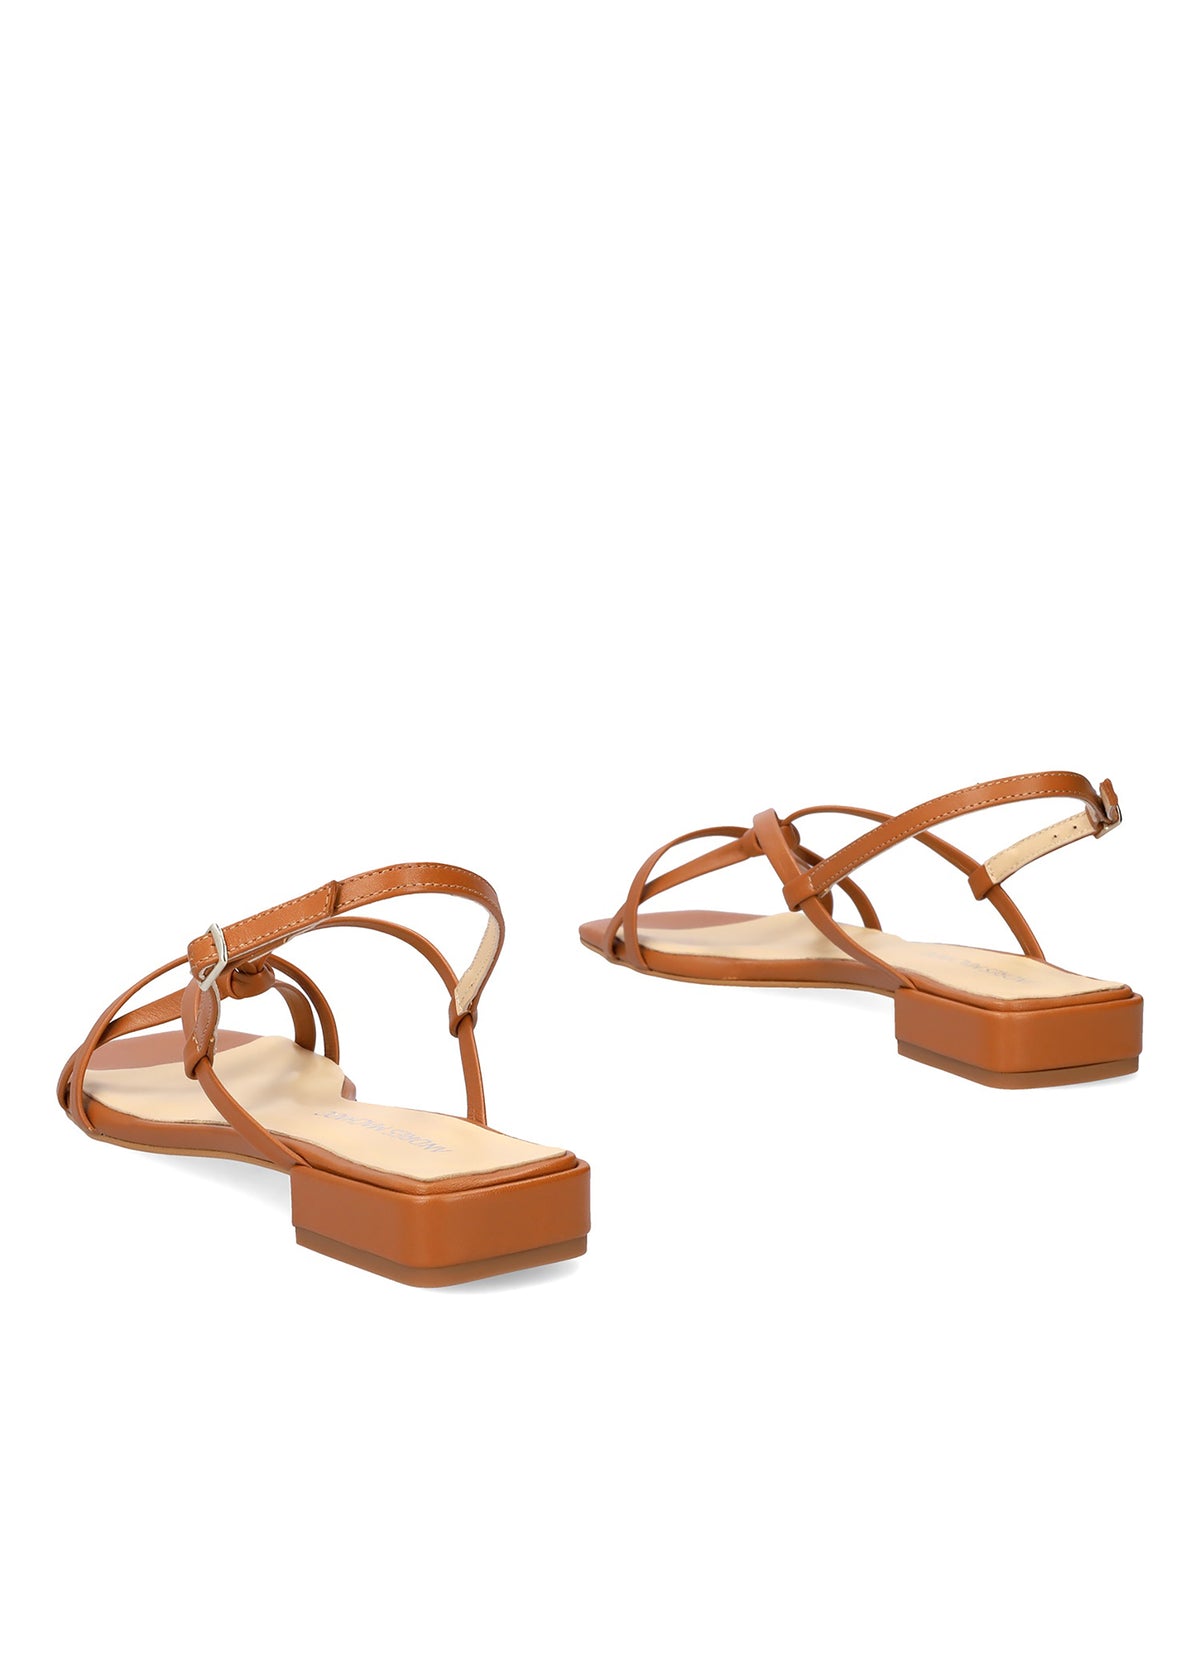 Sandals with thin strings - Vera, brown leather